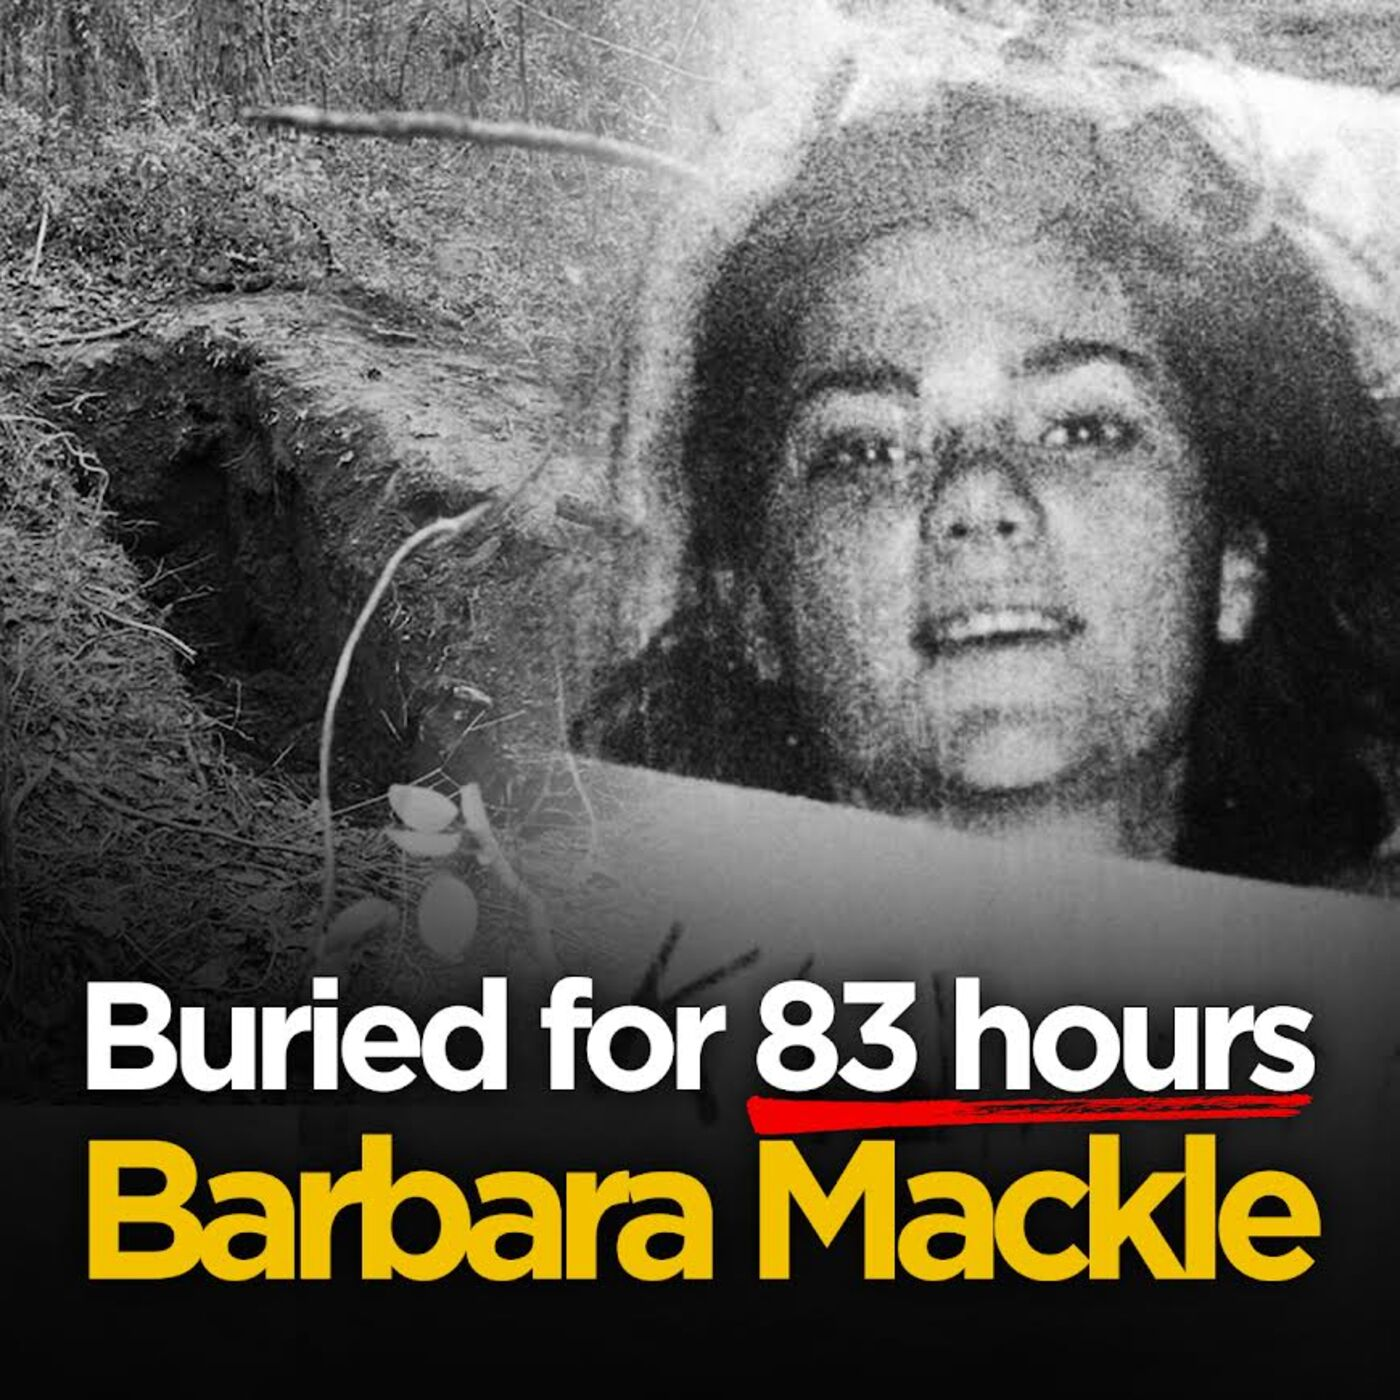 She was buried ALIVE for 83 hours | The agonising kidnapping of Barbara Mackle